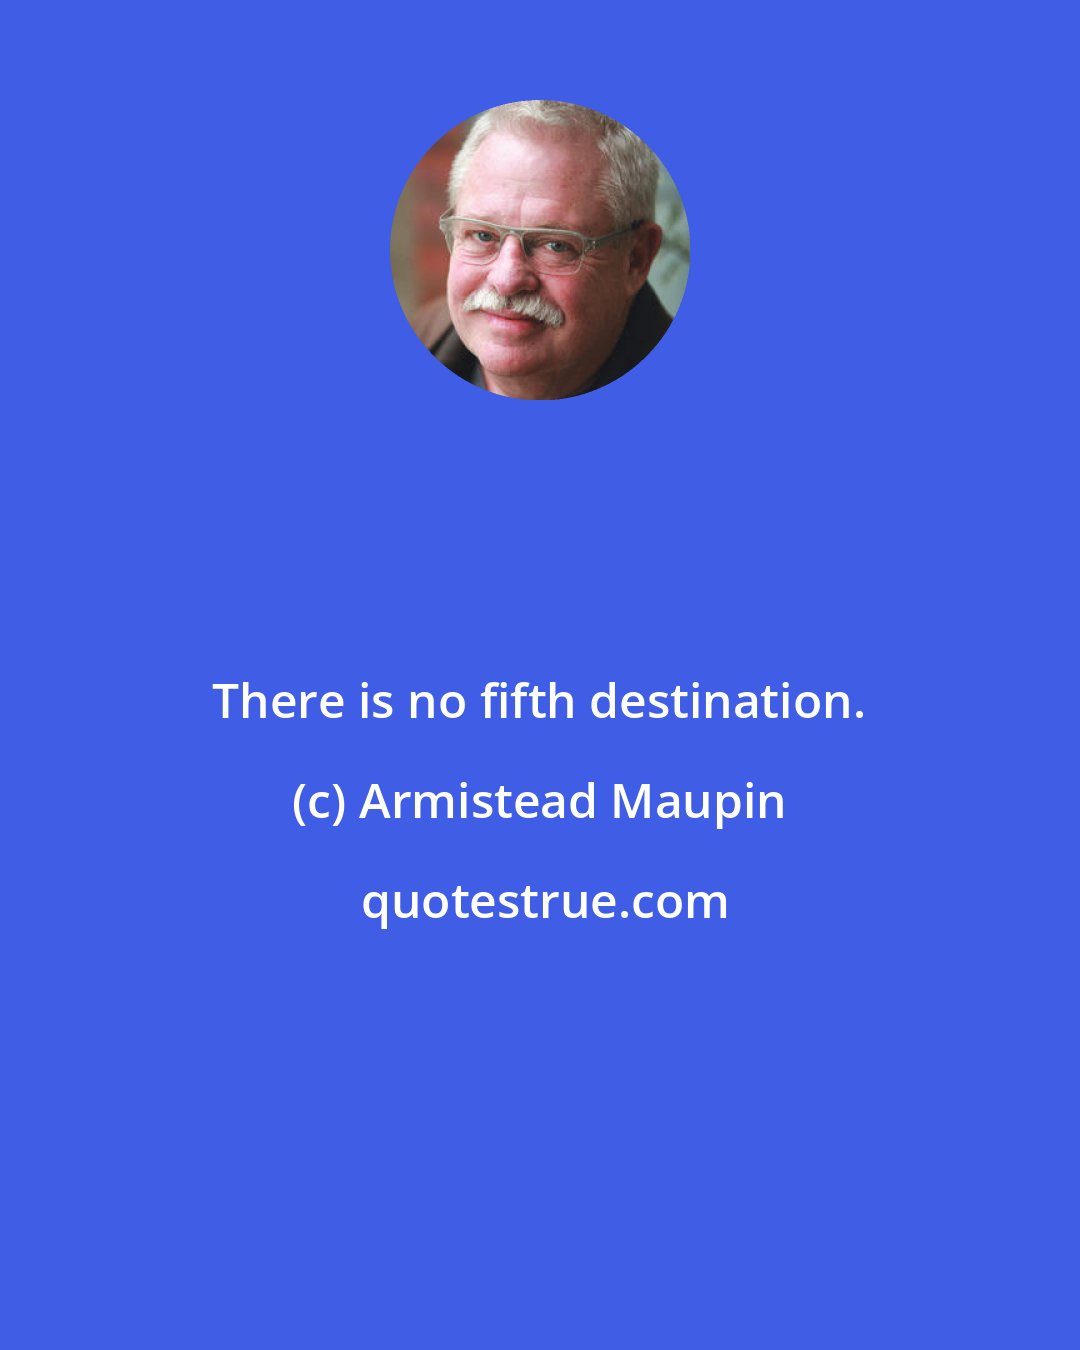 Armistead Maupin: There is no fifth destination.